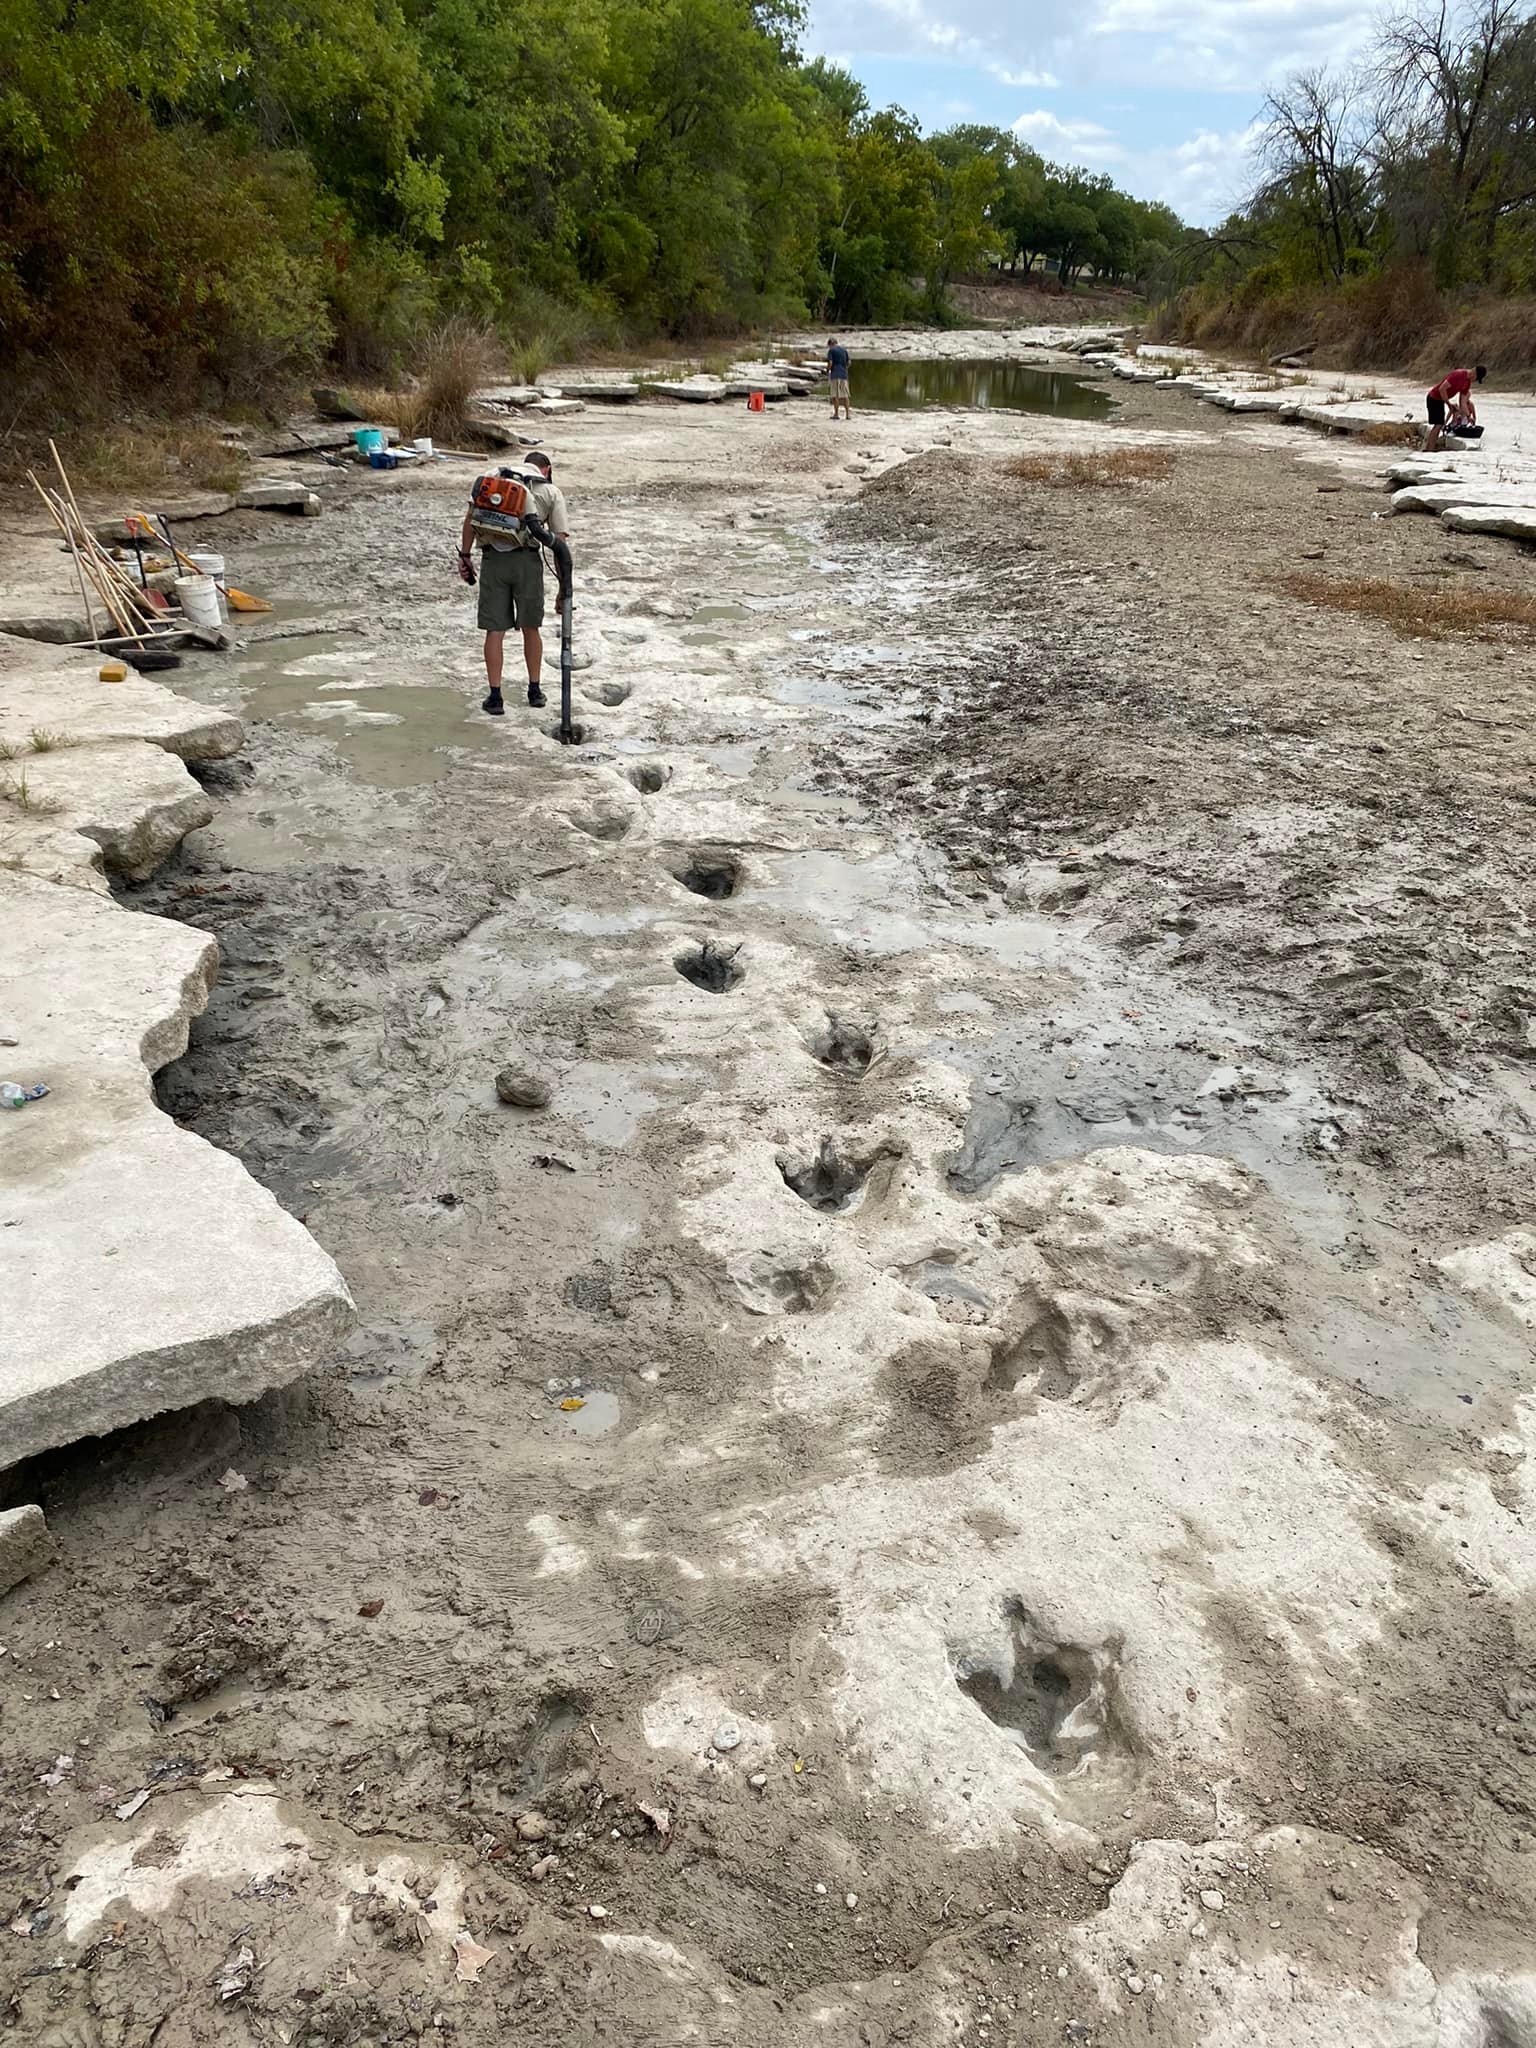 Dinosaur tracks are revealed in a dry riverbed